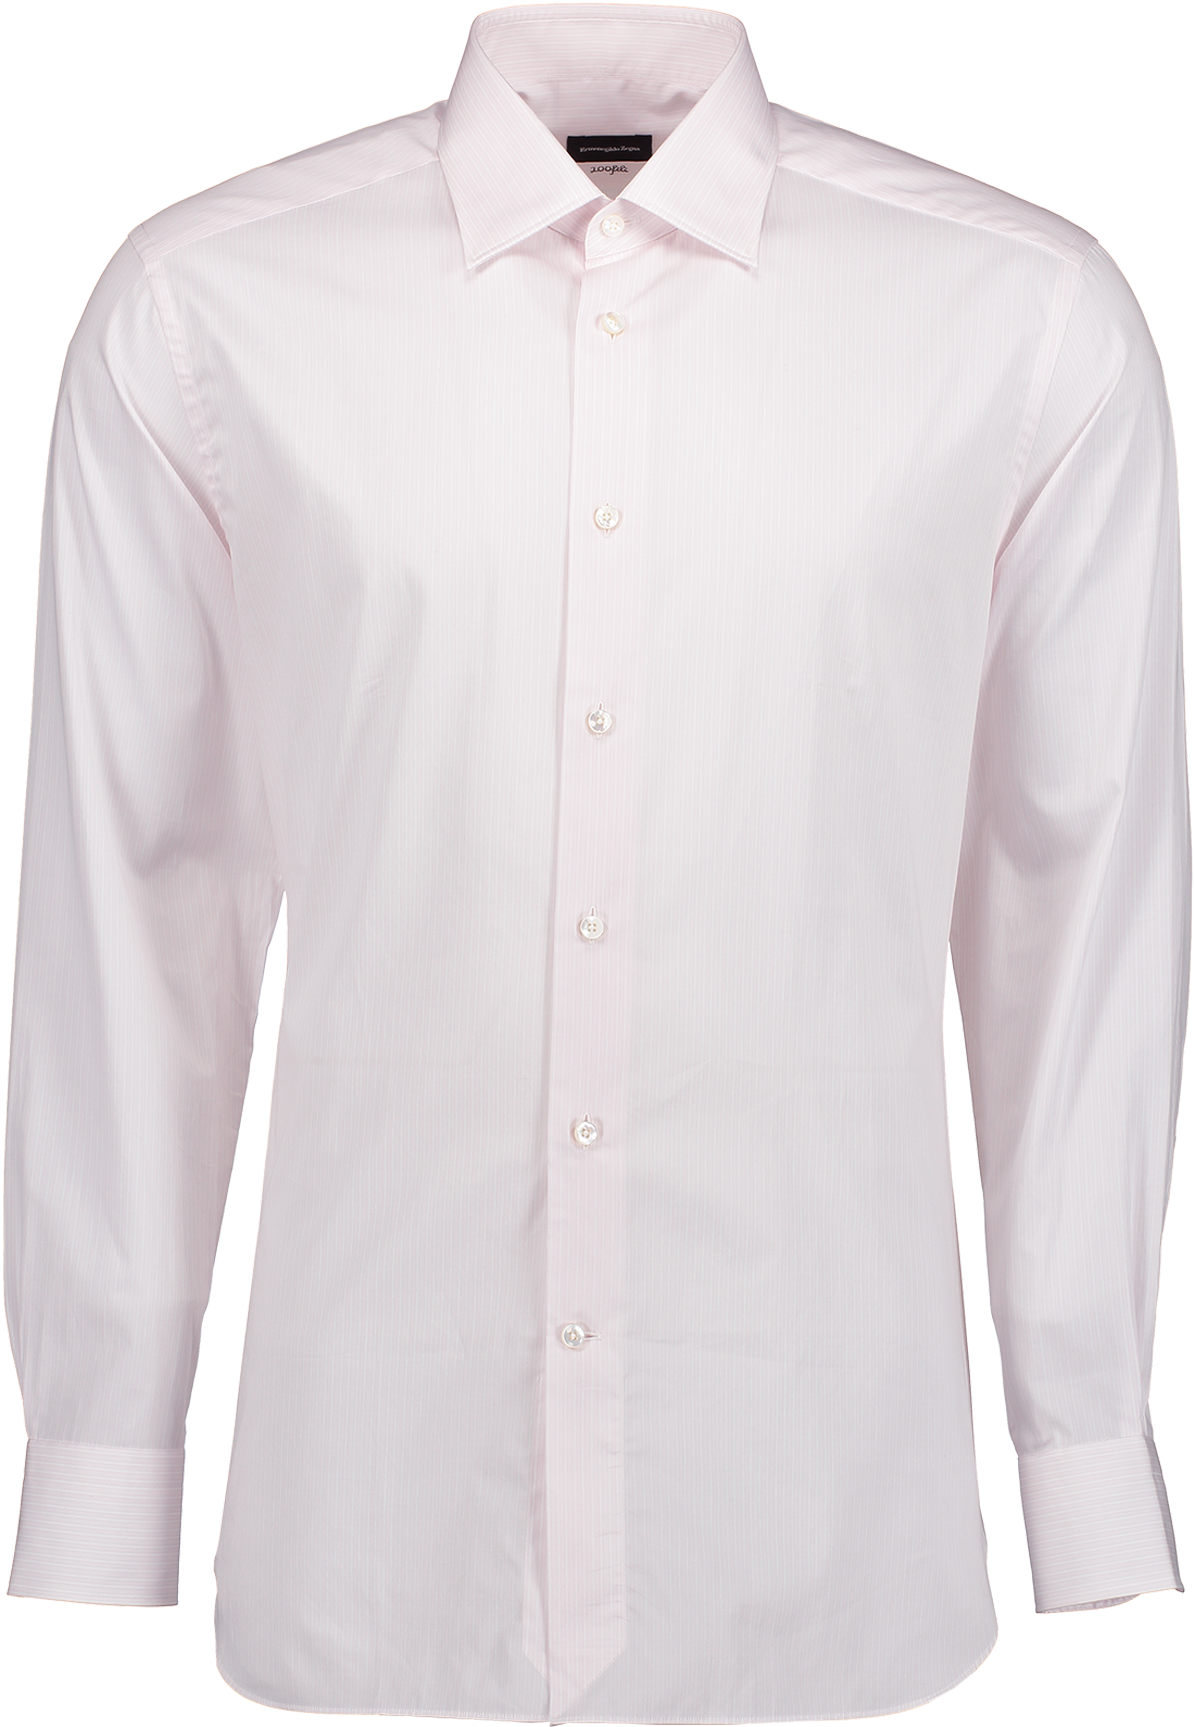 A White Shirt With Buttons